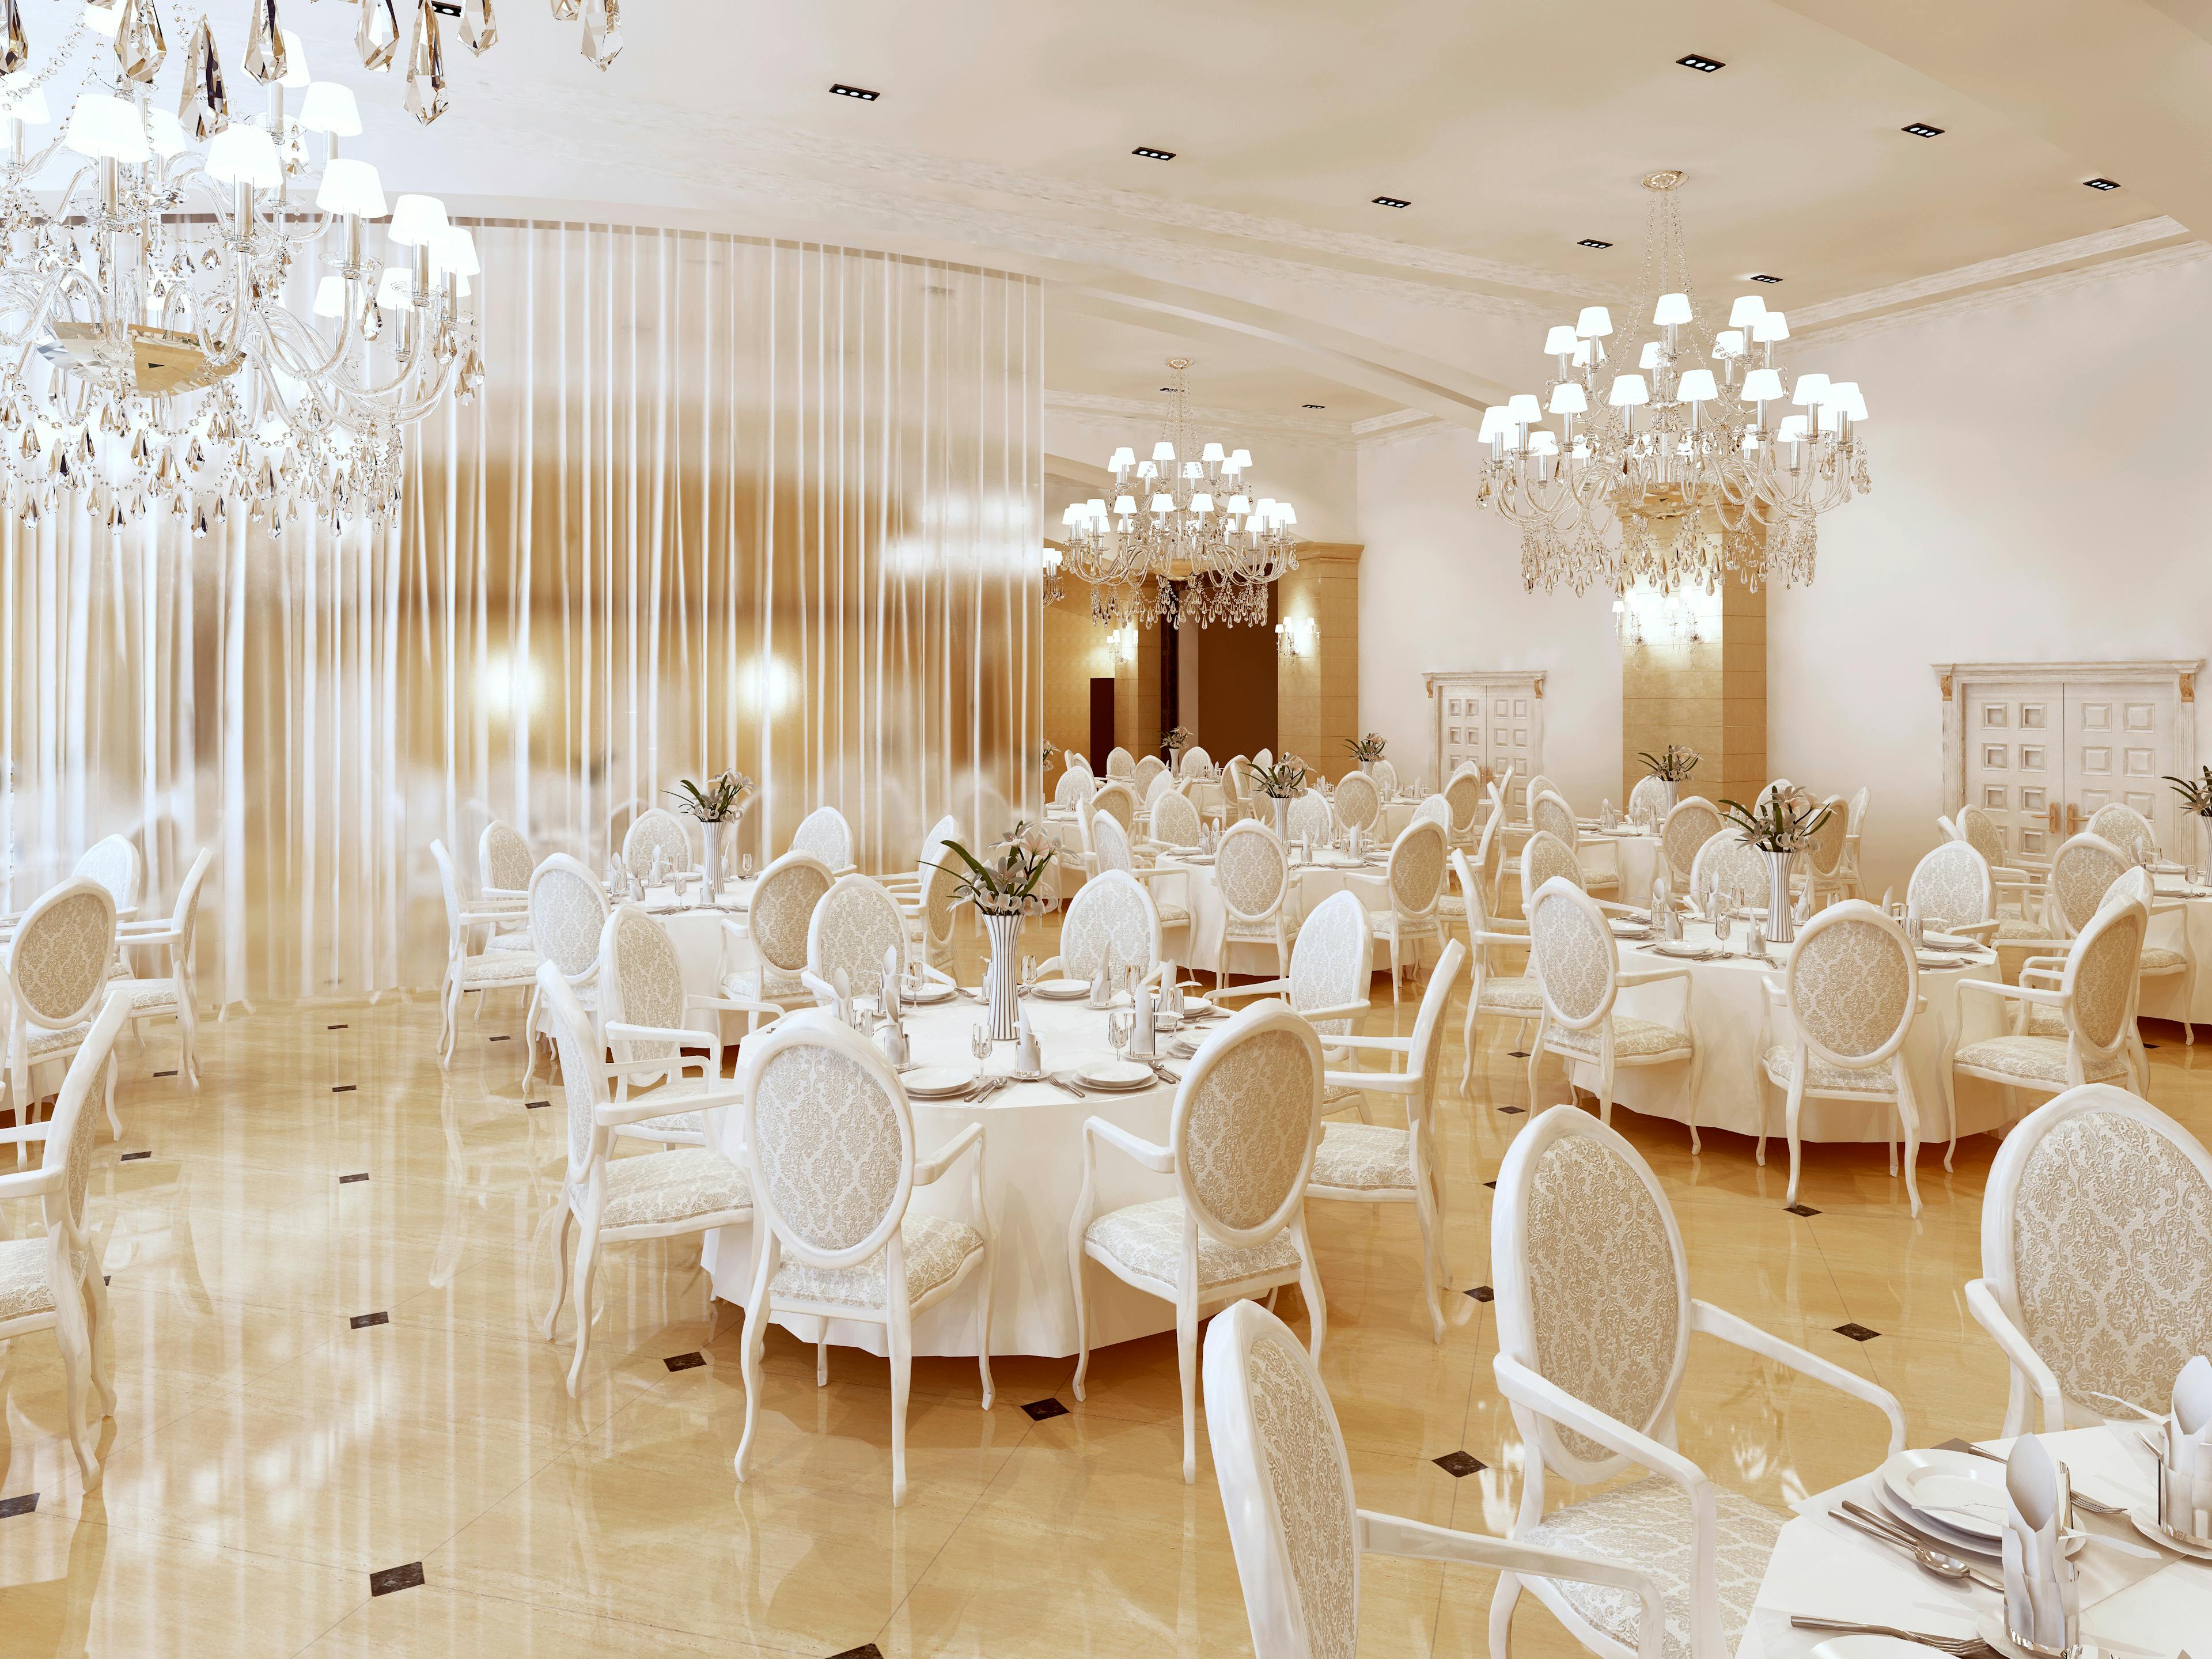 Luxurious restaurant and a Ballroom in a Luxury Hotel